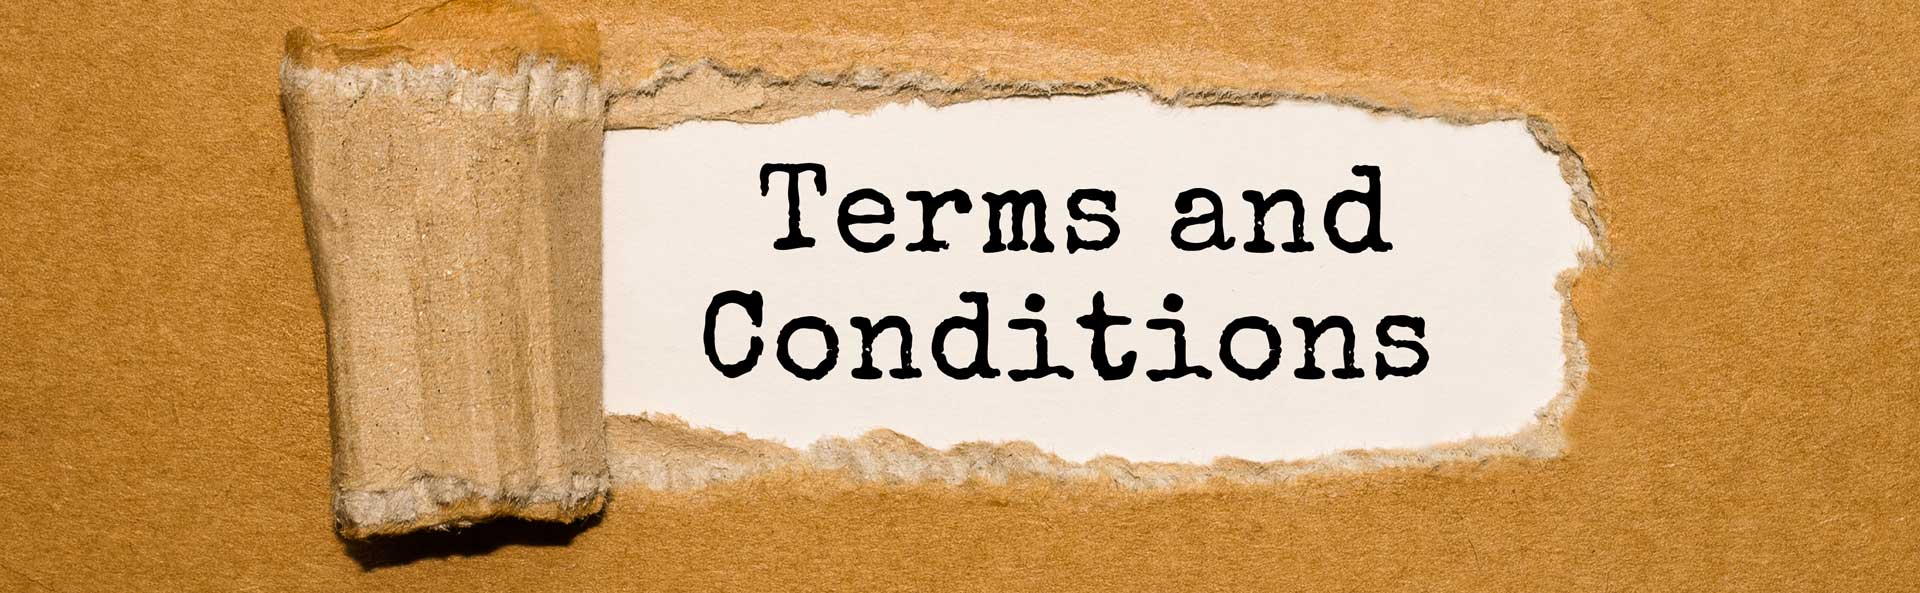 banner Terms-Conditions